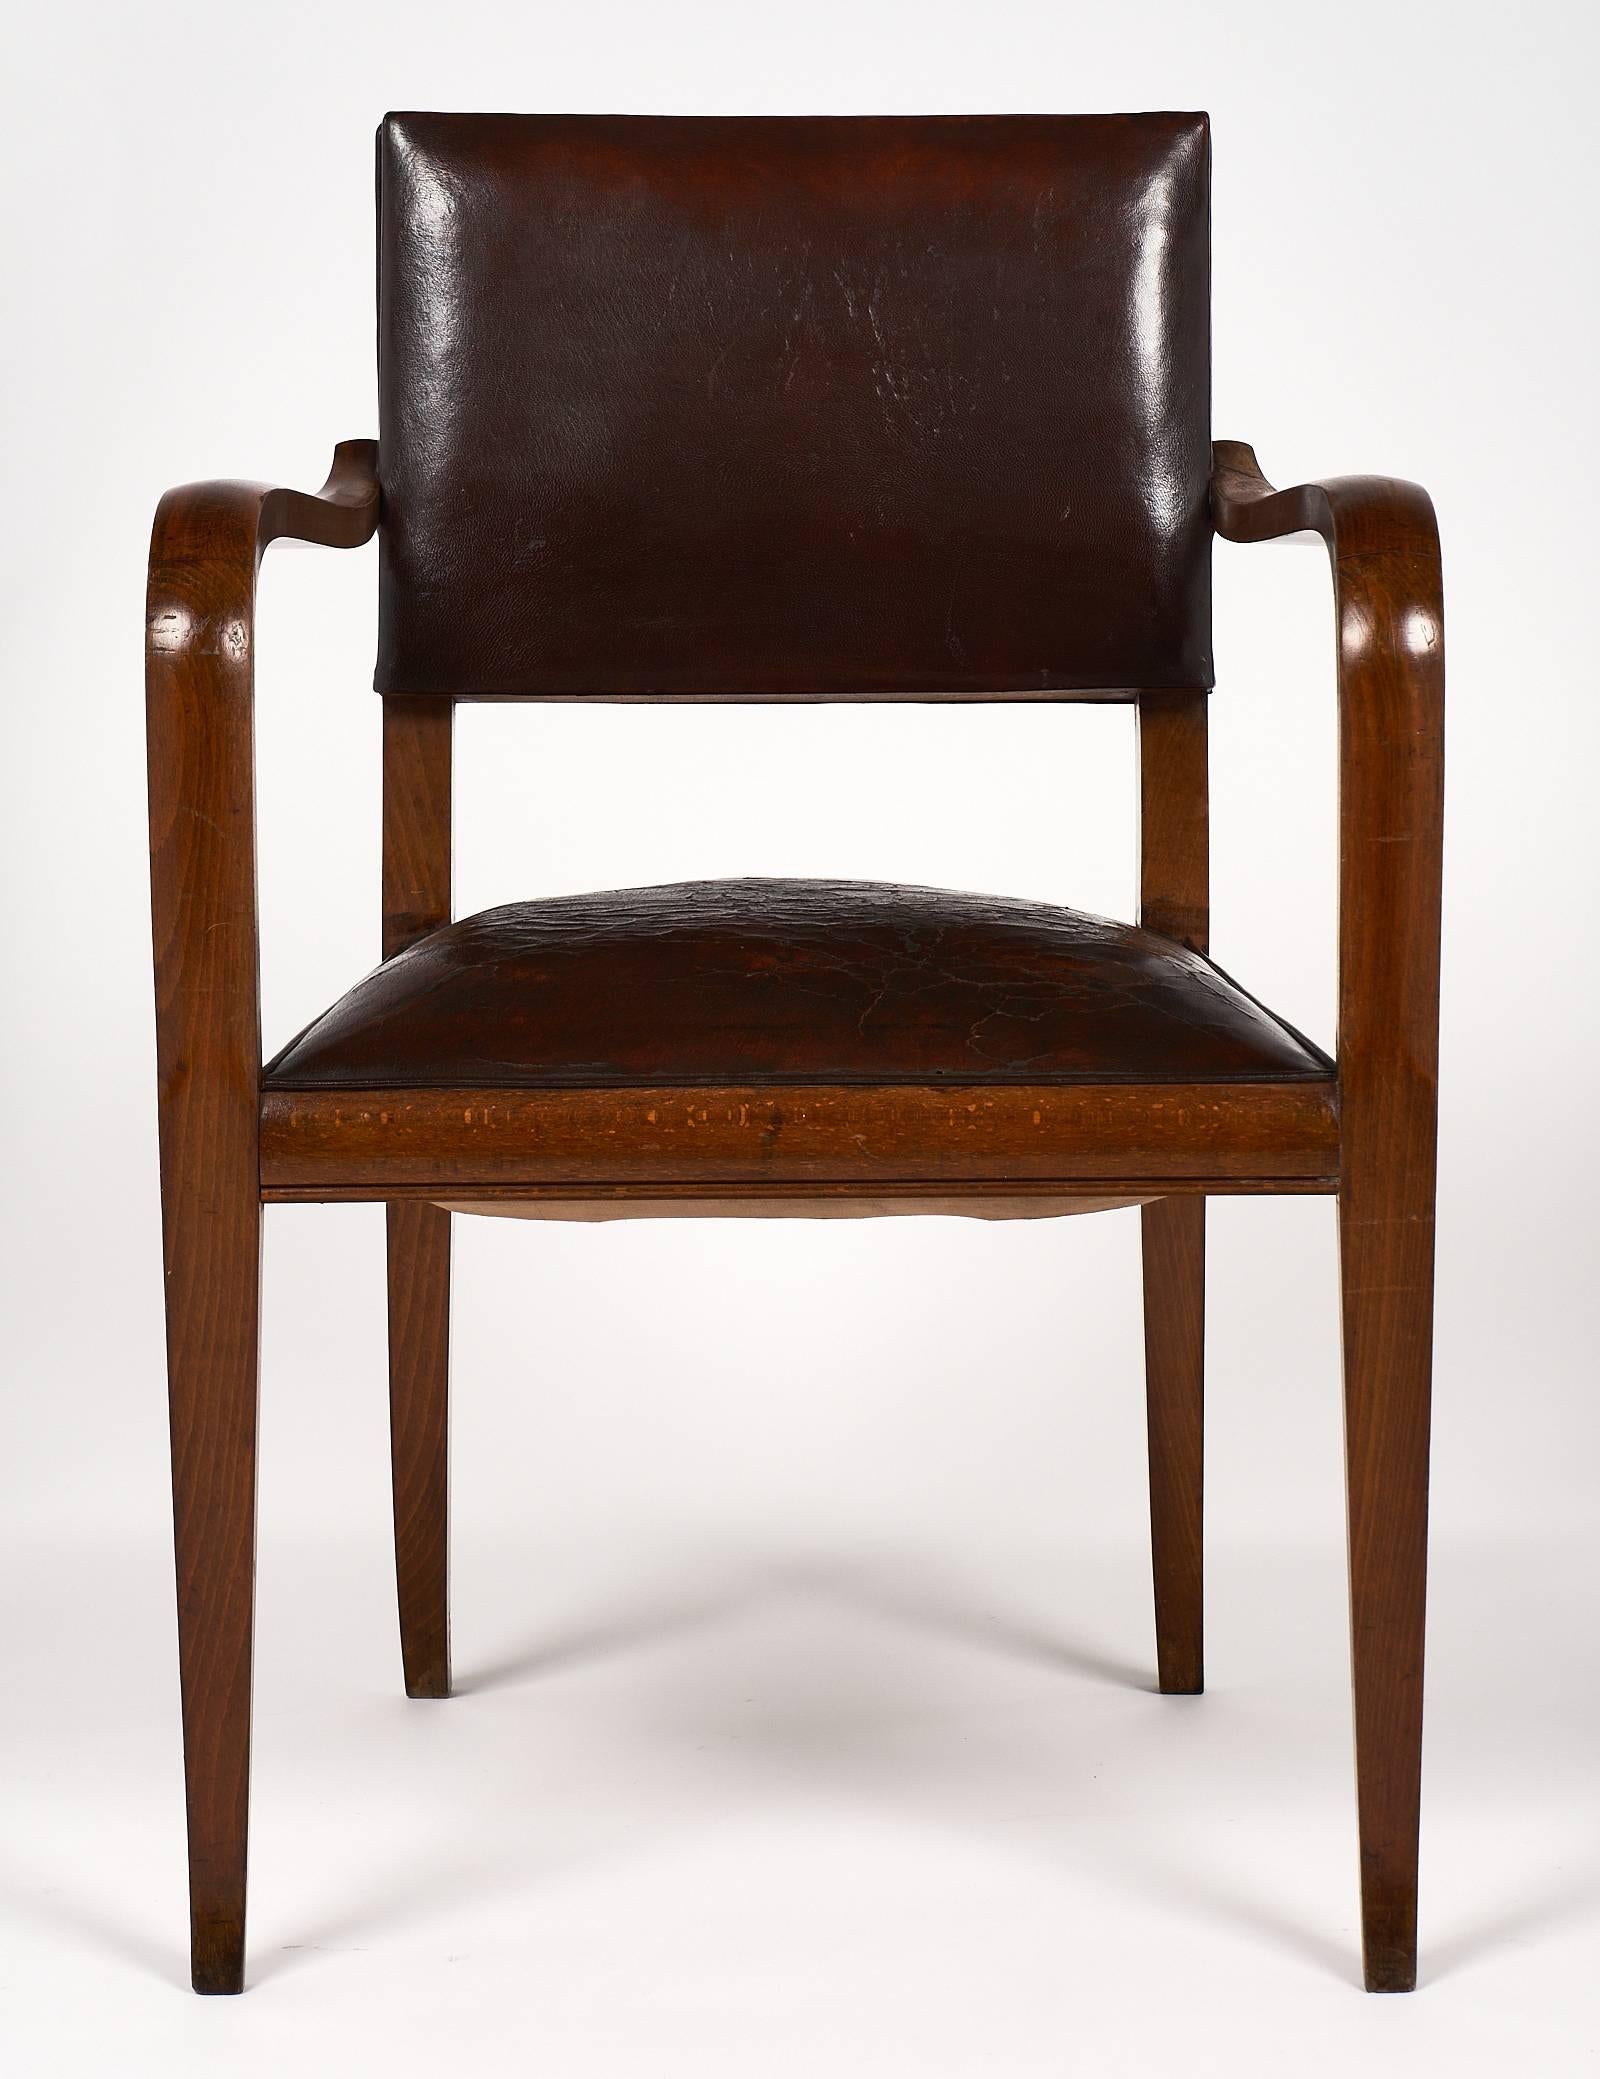 Wonderful French Art Deco period armchair in solid walnut with original leather upholstery. Leather and wood are in good condition. The chair is very strong and comfortable.